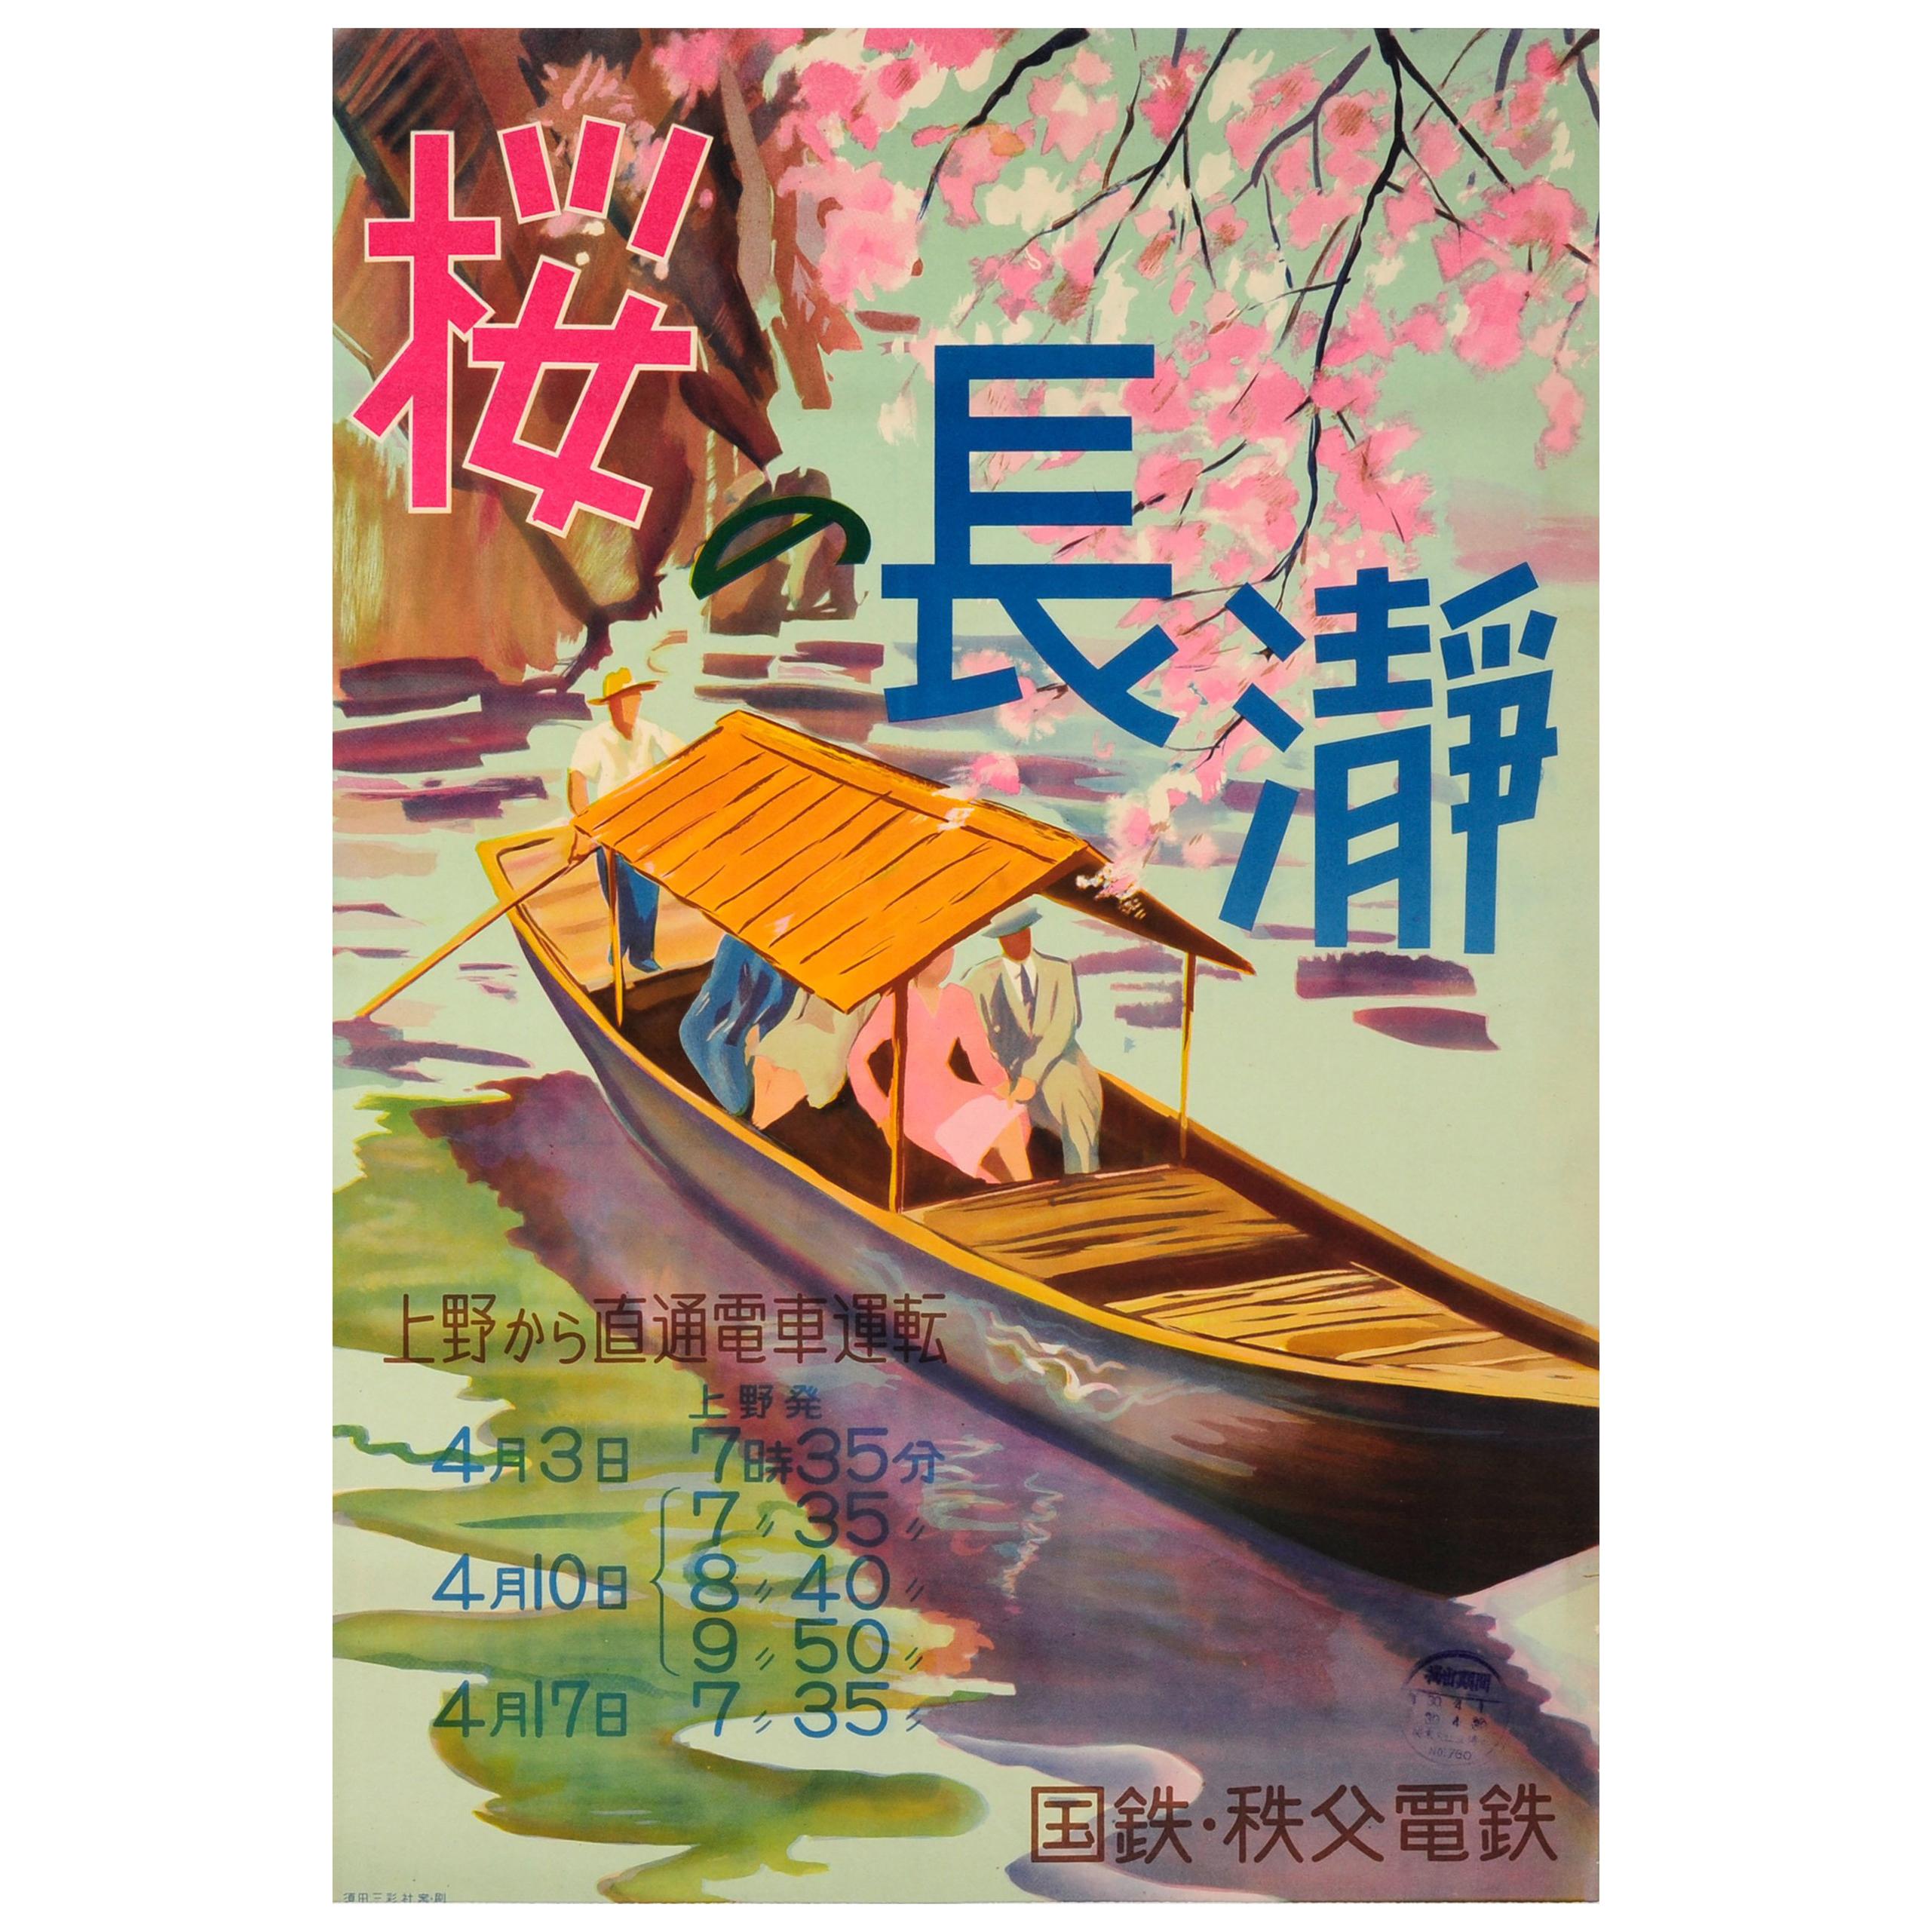 Original Vintage Japan Travel Poster Spring Cherry Blossoms on River Boat Cruise